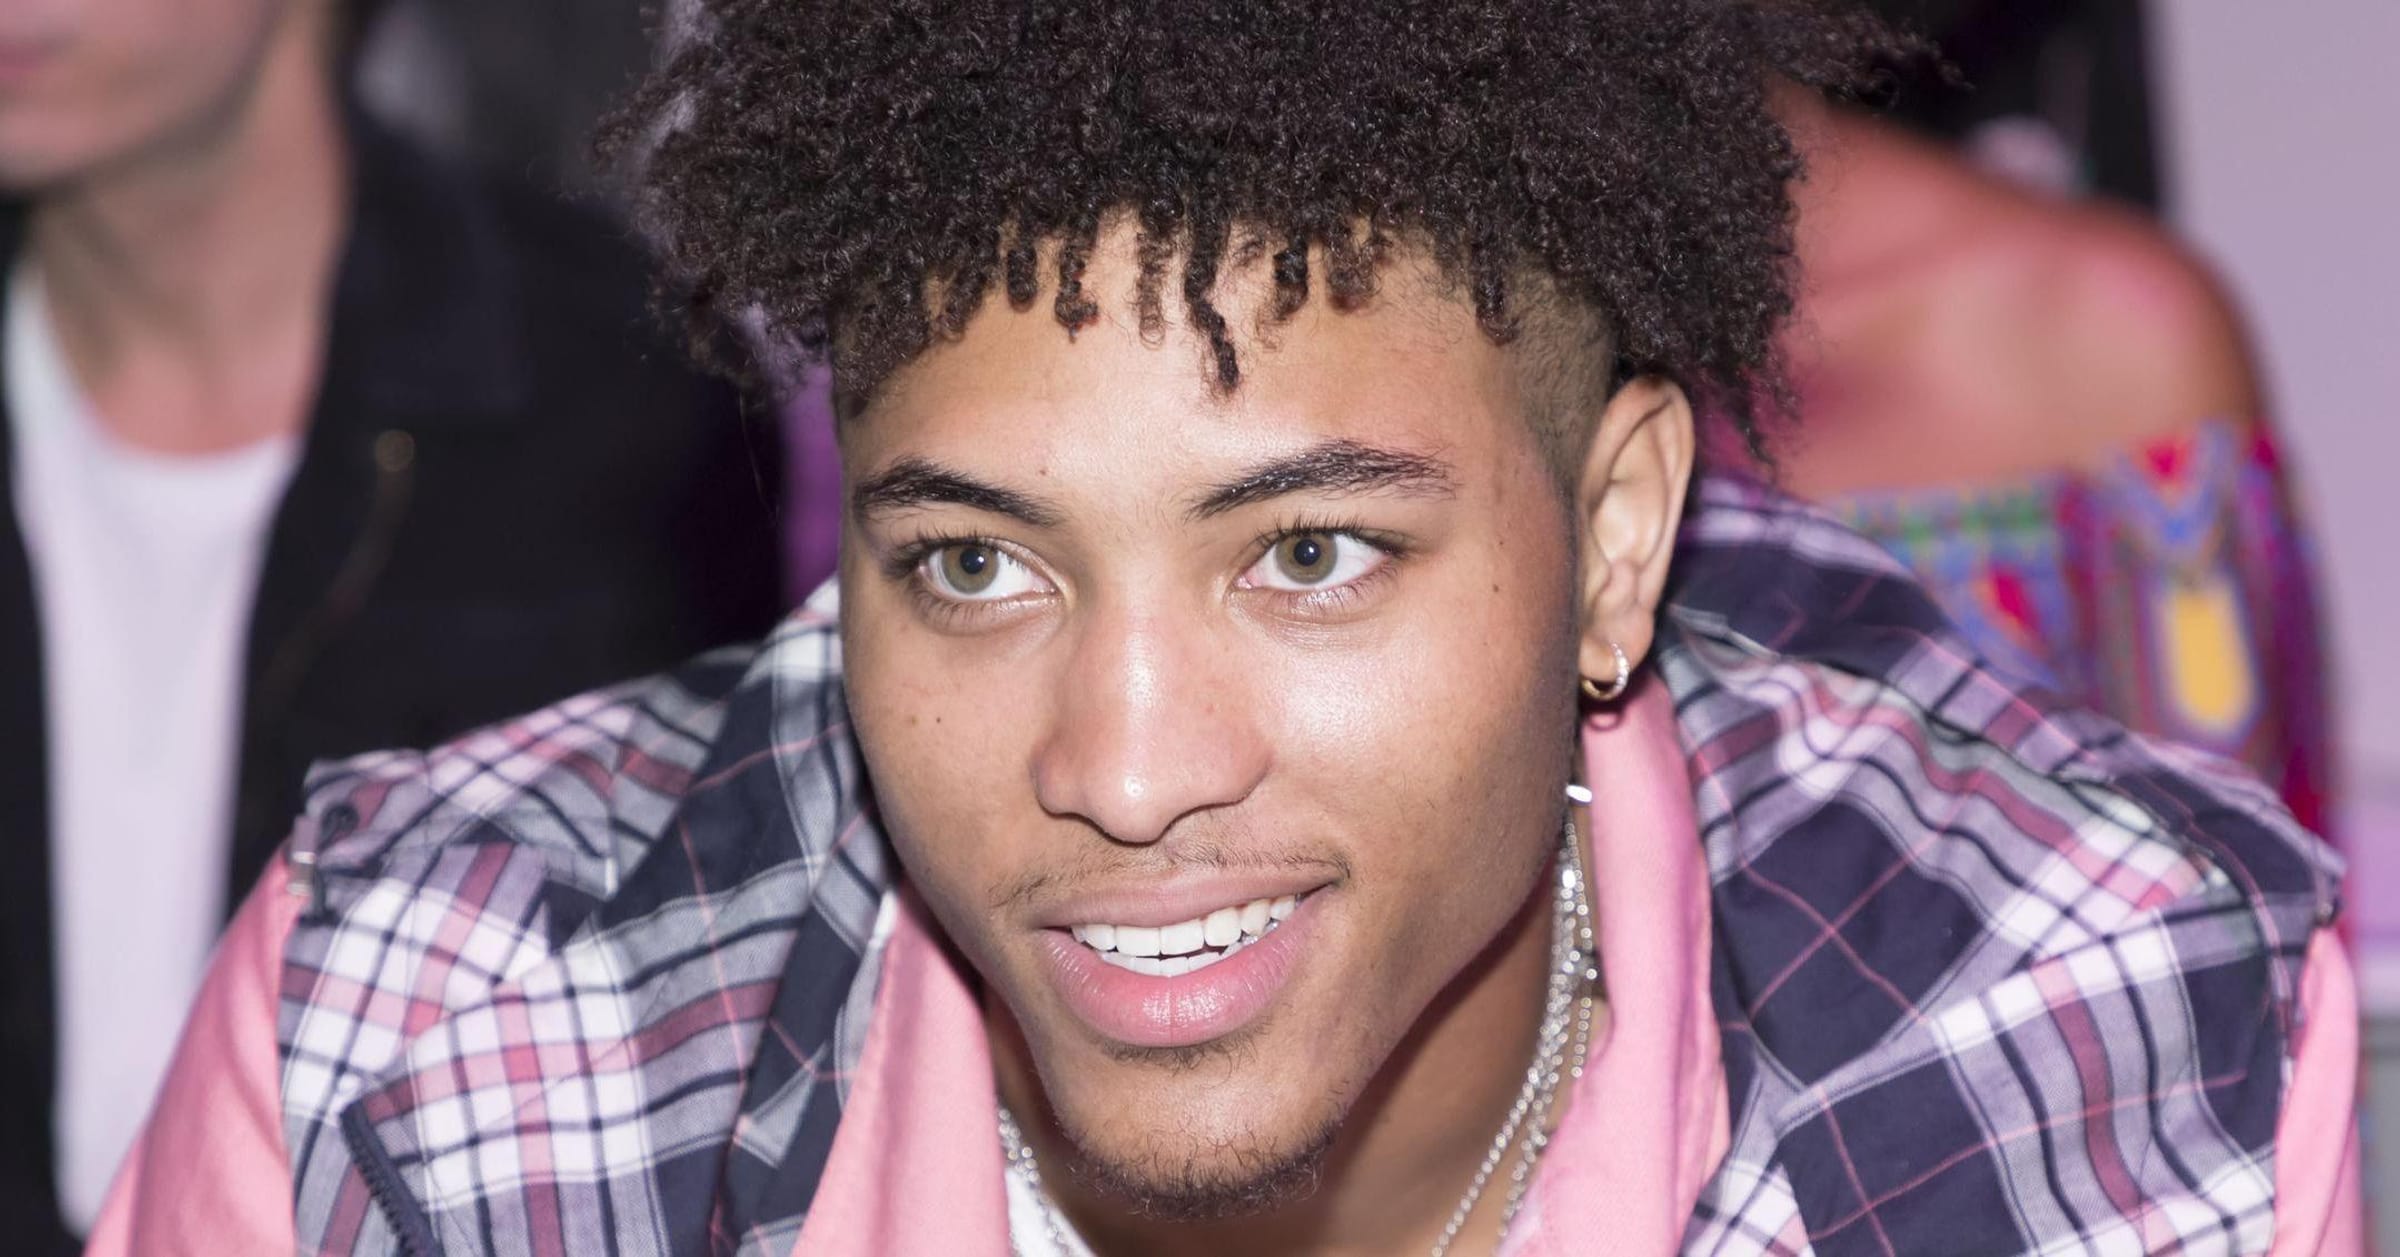 Ranking the 15 best light skin basketball players in the NBA right now